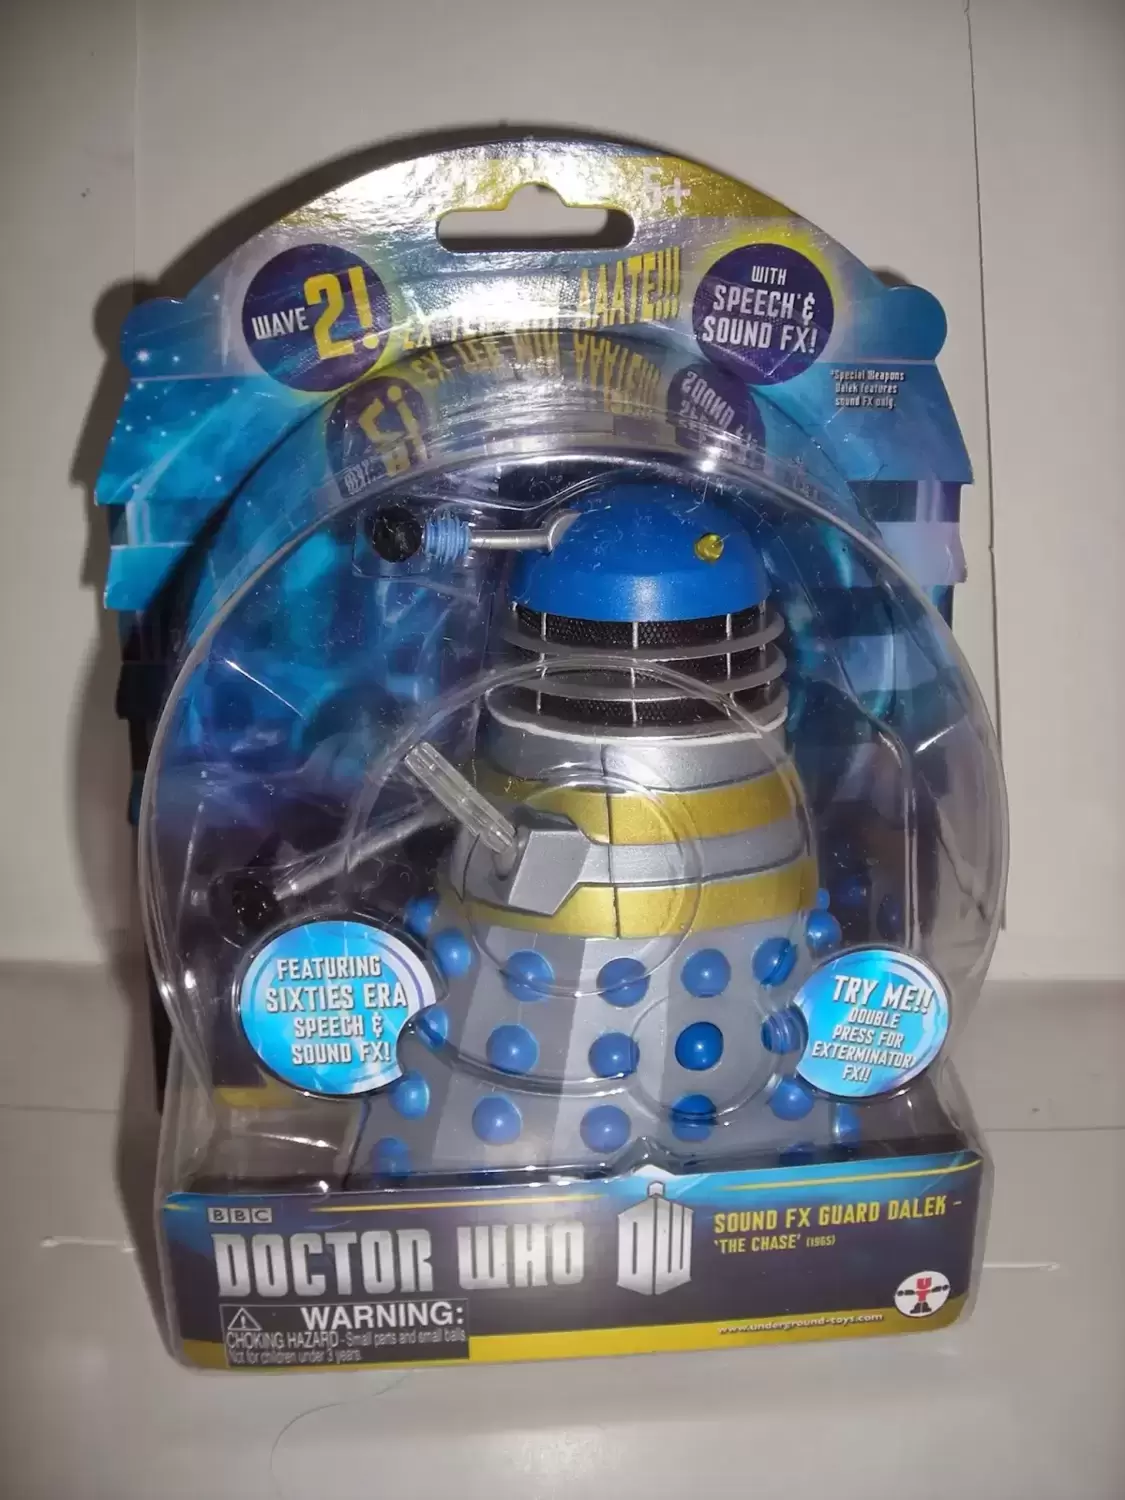 Action Figures - Sound FX Guard Dalek - The Chase